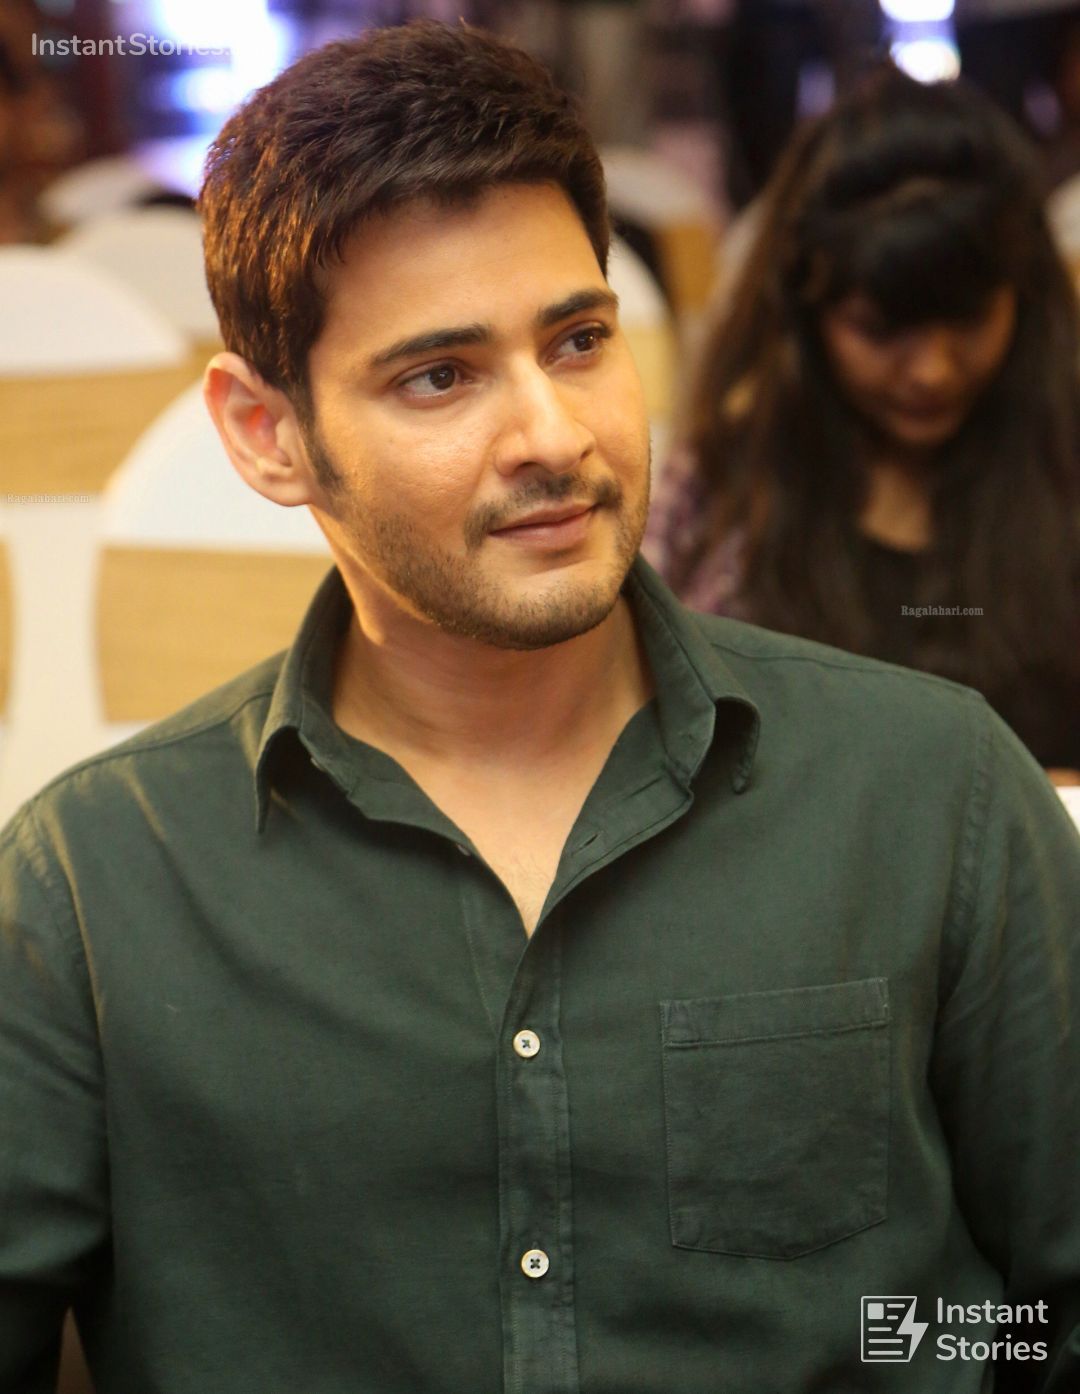 Mahesh babu latest hd images the images are high quality p k to download and use them as wallpapers whatsapp dpâ mahesh babu hd images telugu hero